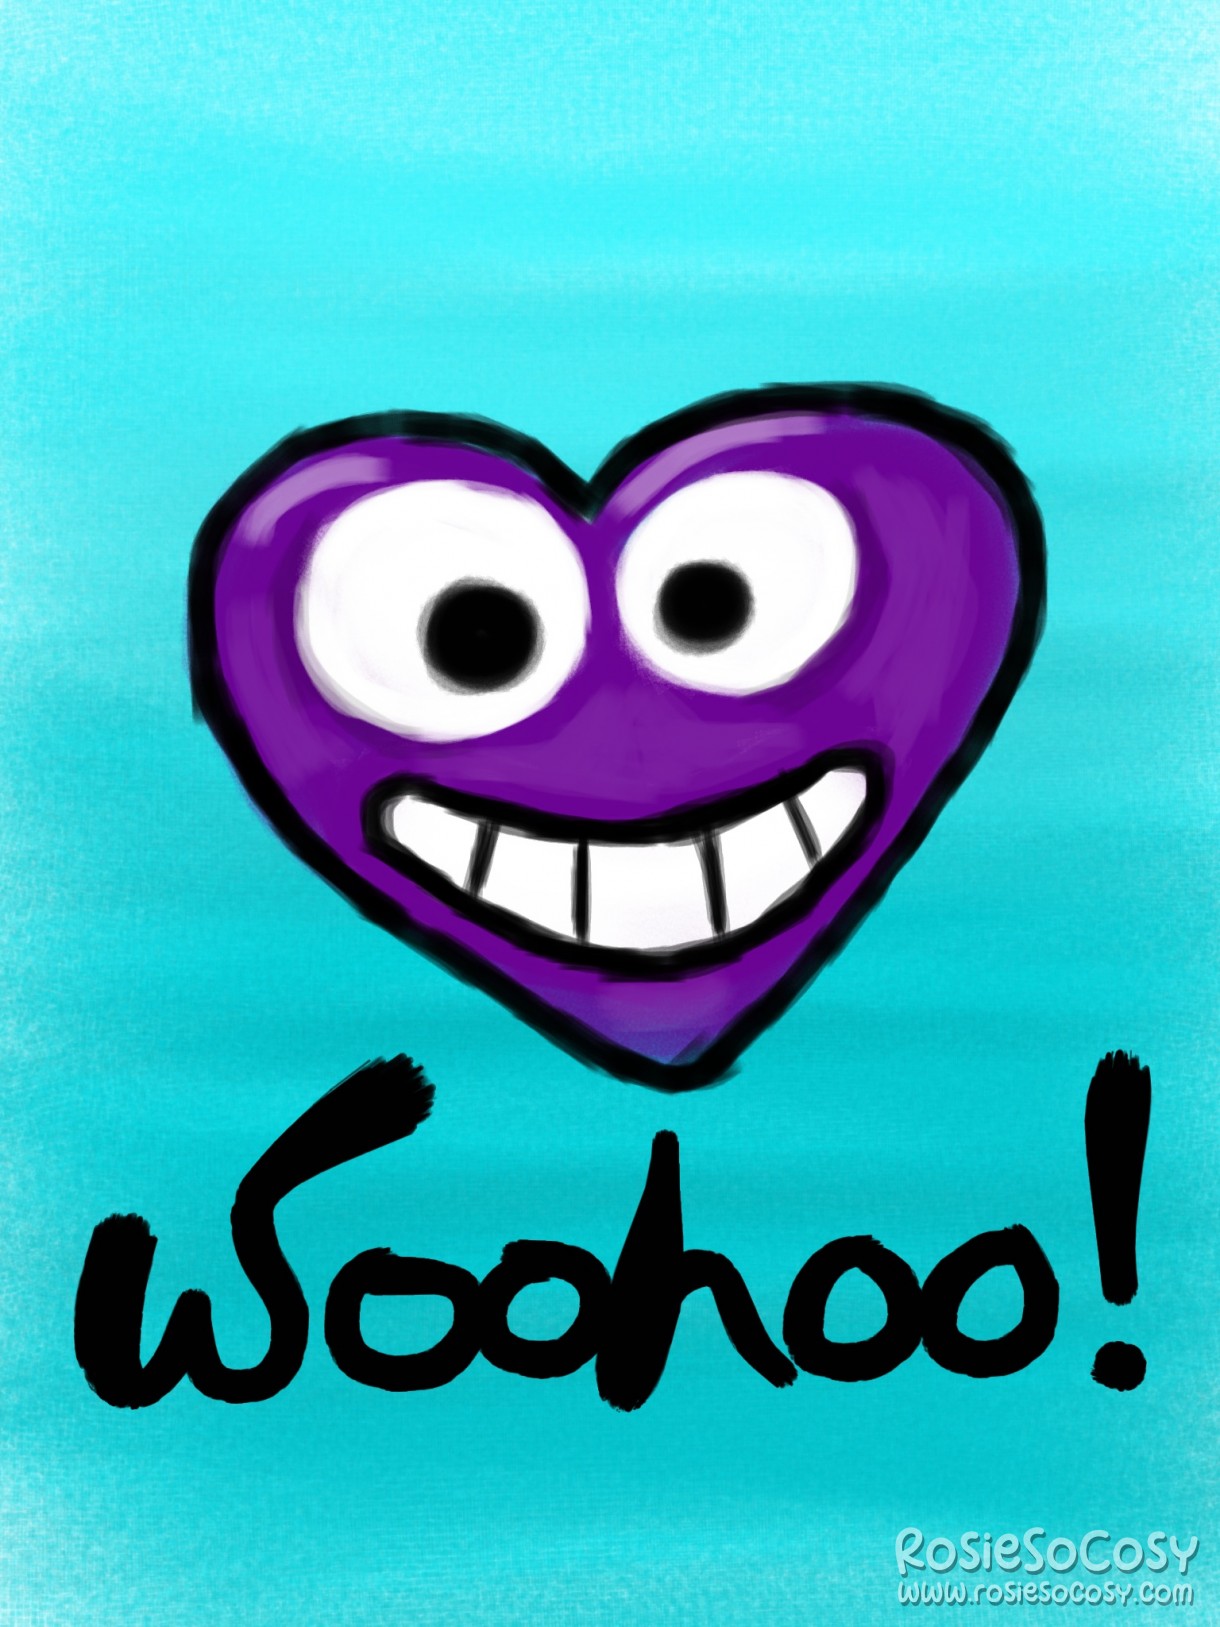 Classic woohoo heart from The Sims 2. The heart is purple, with two googly eyes and a wide grin. Underneath the heart is the text Woohoo! And the background is aqua, with a slight gradient going from light to dark.